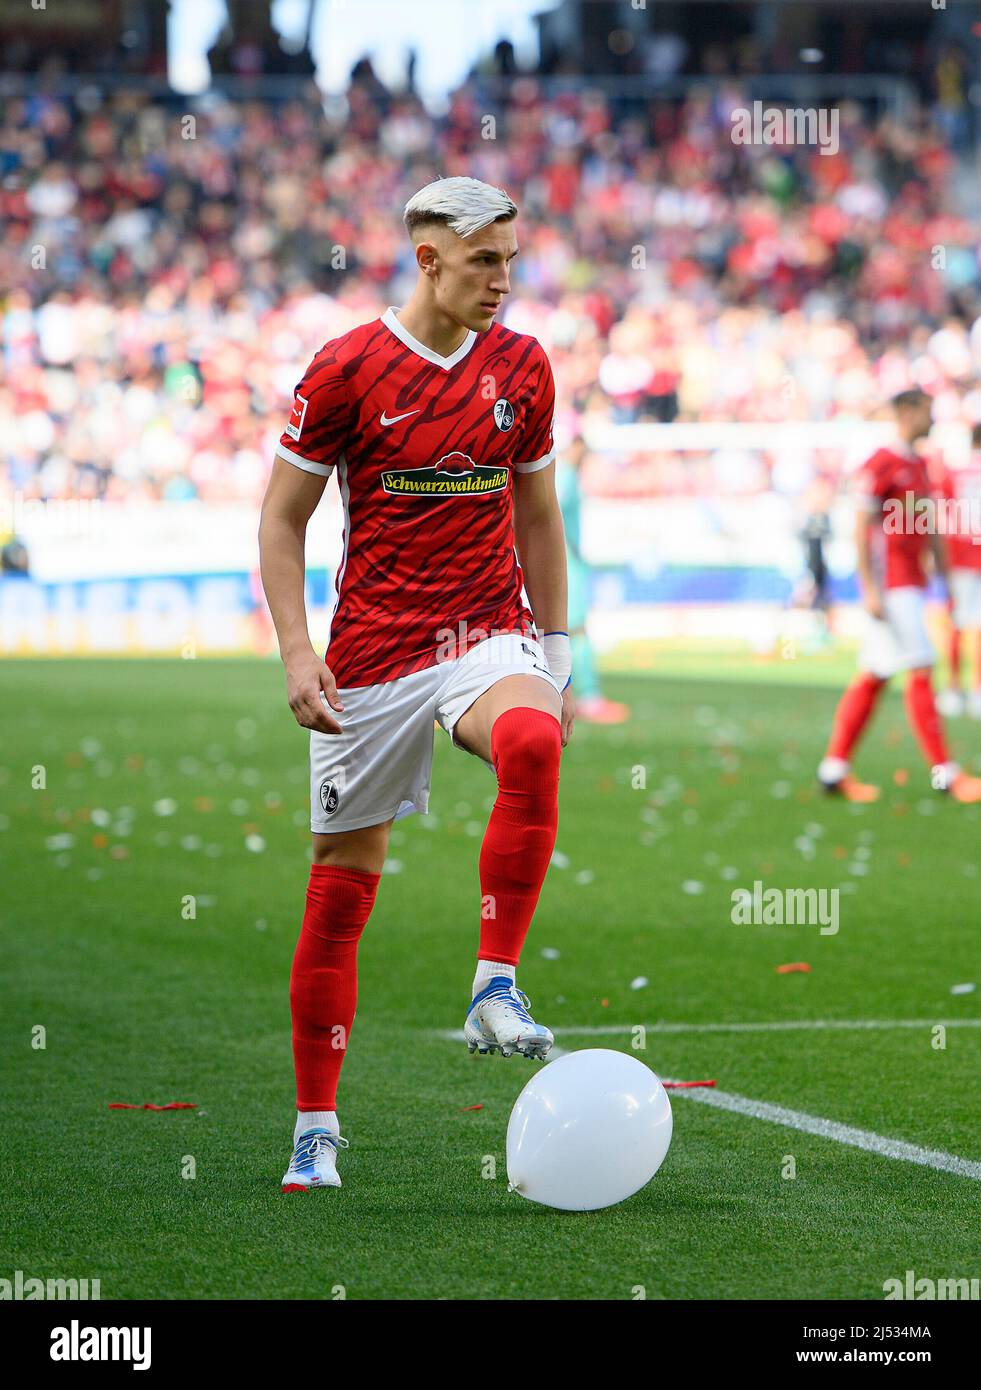 Nico Schlotterbeck Fr With A Balloon On The Pitch Soccer 1st Bundesliga 30th Matchday Sc Freiburg Fr Vfl Bochum Bo 3 0 On April 16th 22 In Freiburg Germany Dfl Regulations Prohibit